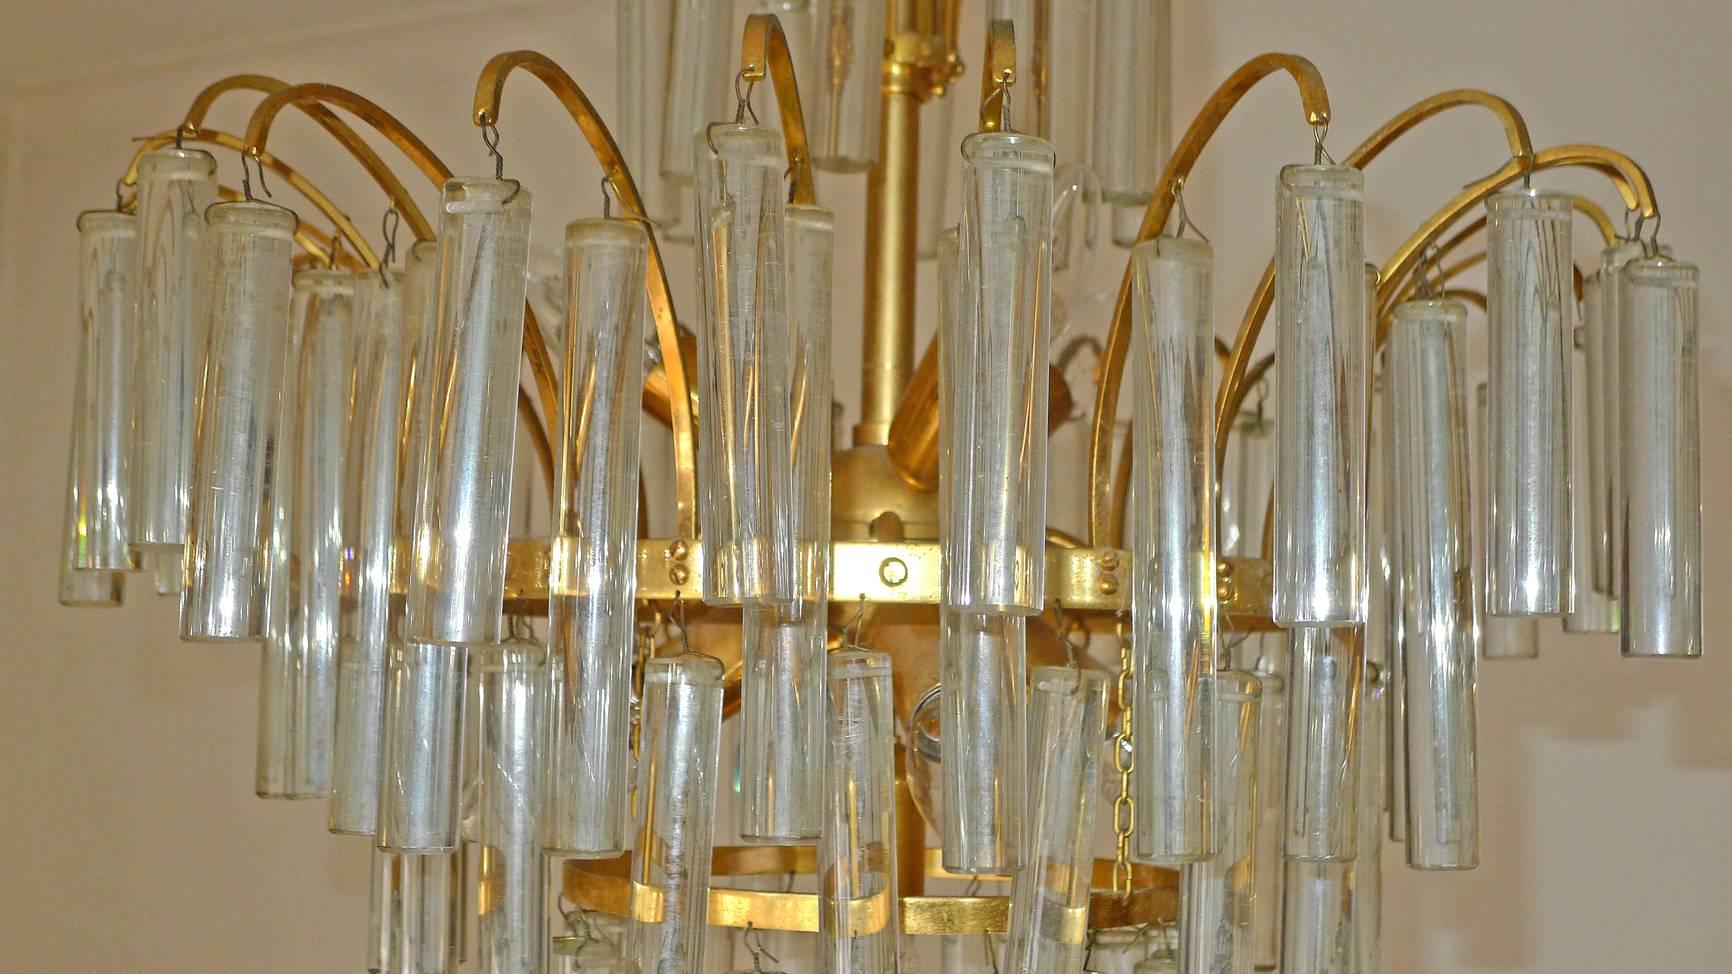 Large Venini Camer Midcentury Gilt Brass 94 Crystal Rods Waterfall Chandelier For Sale 2